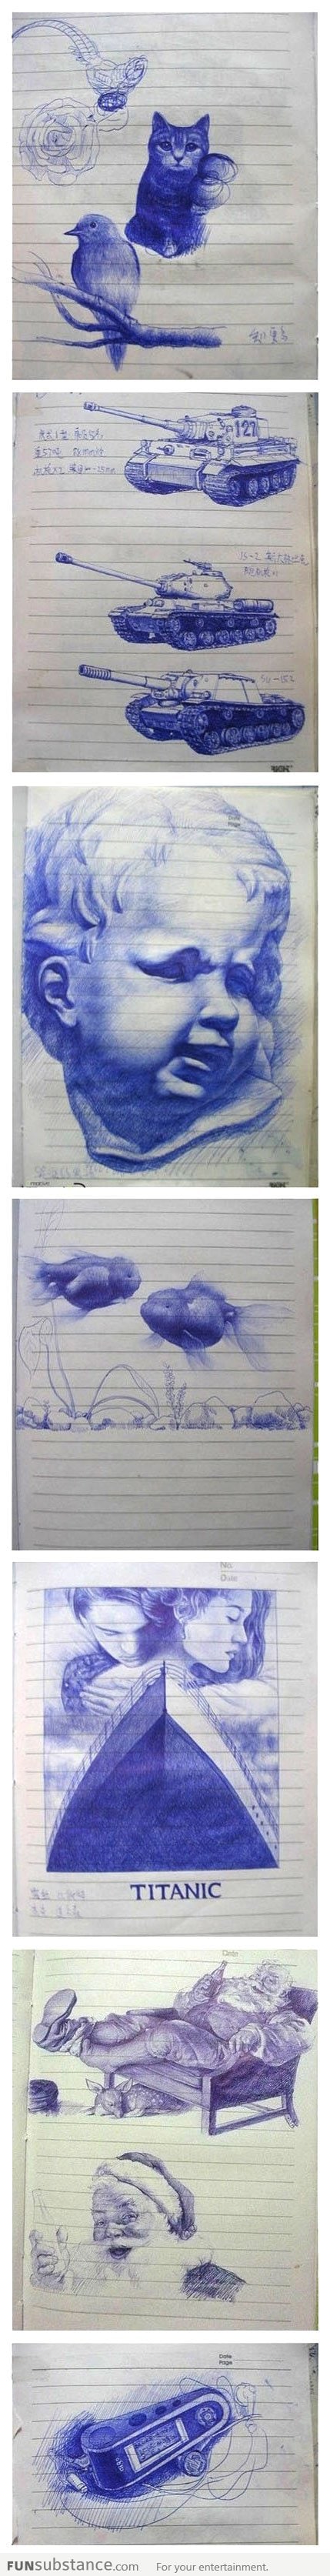 Awesome pen drawings